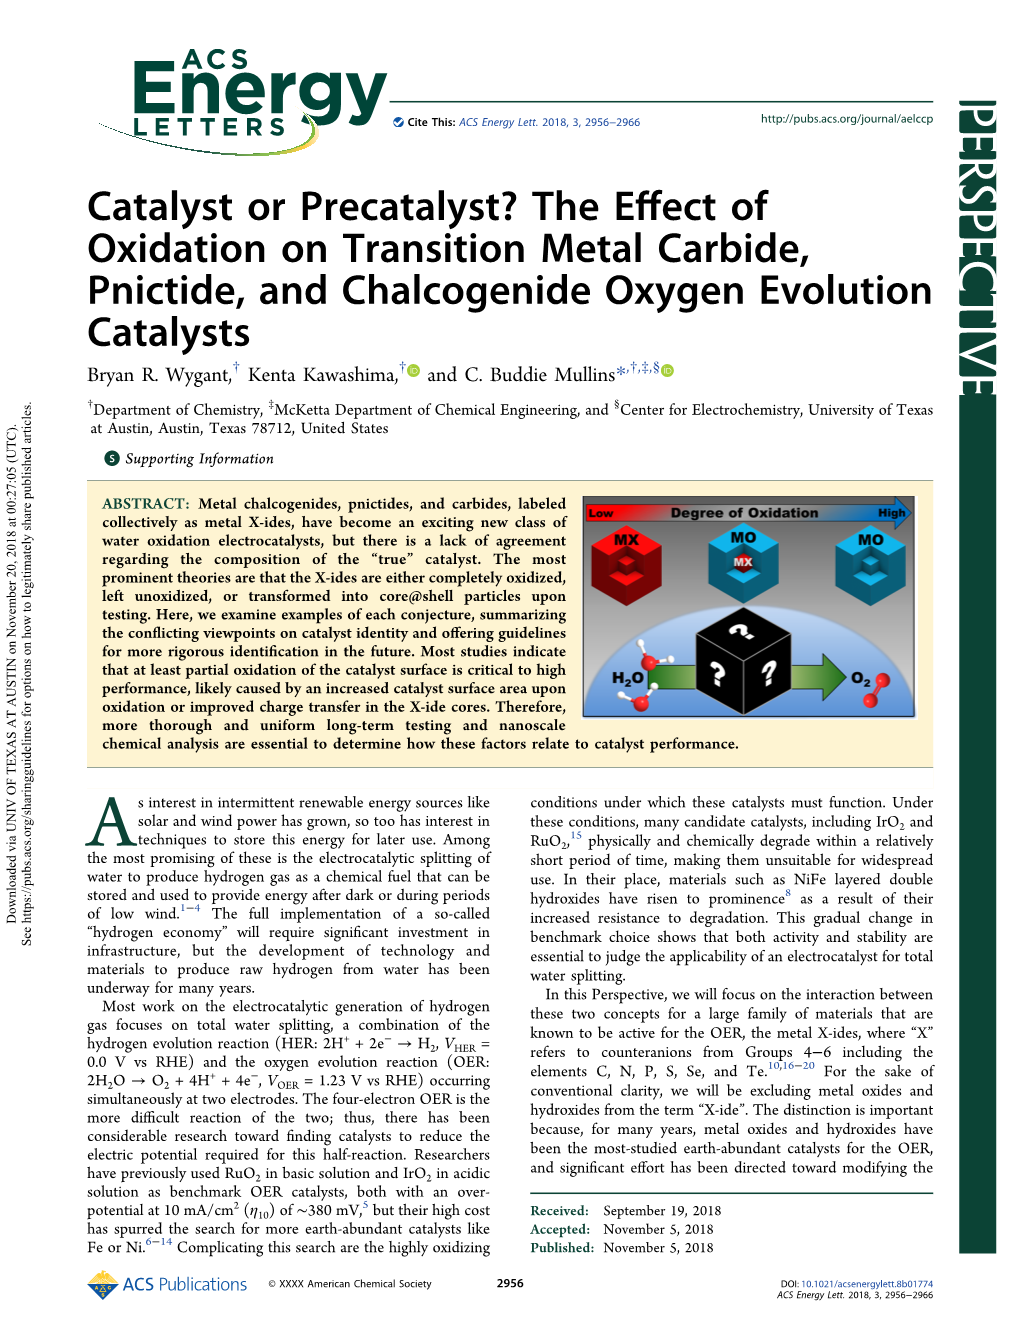 Catalyst Or Precatalyst? the Effect of Oxidation on Transition Metal